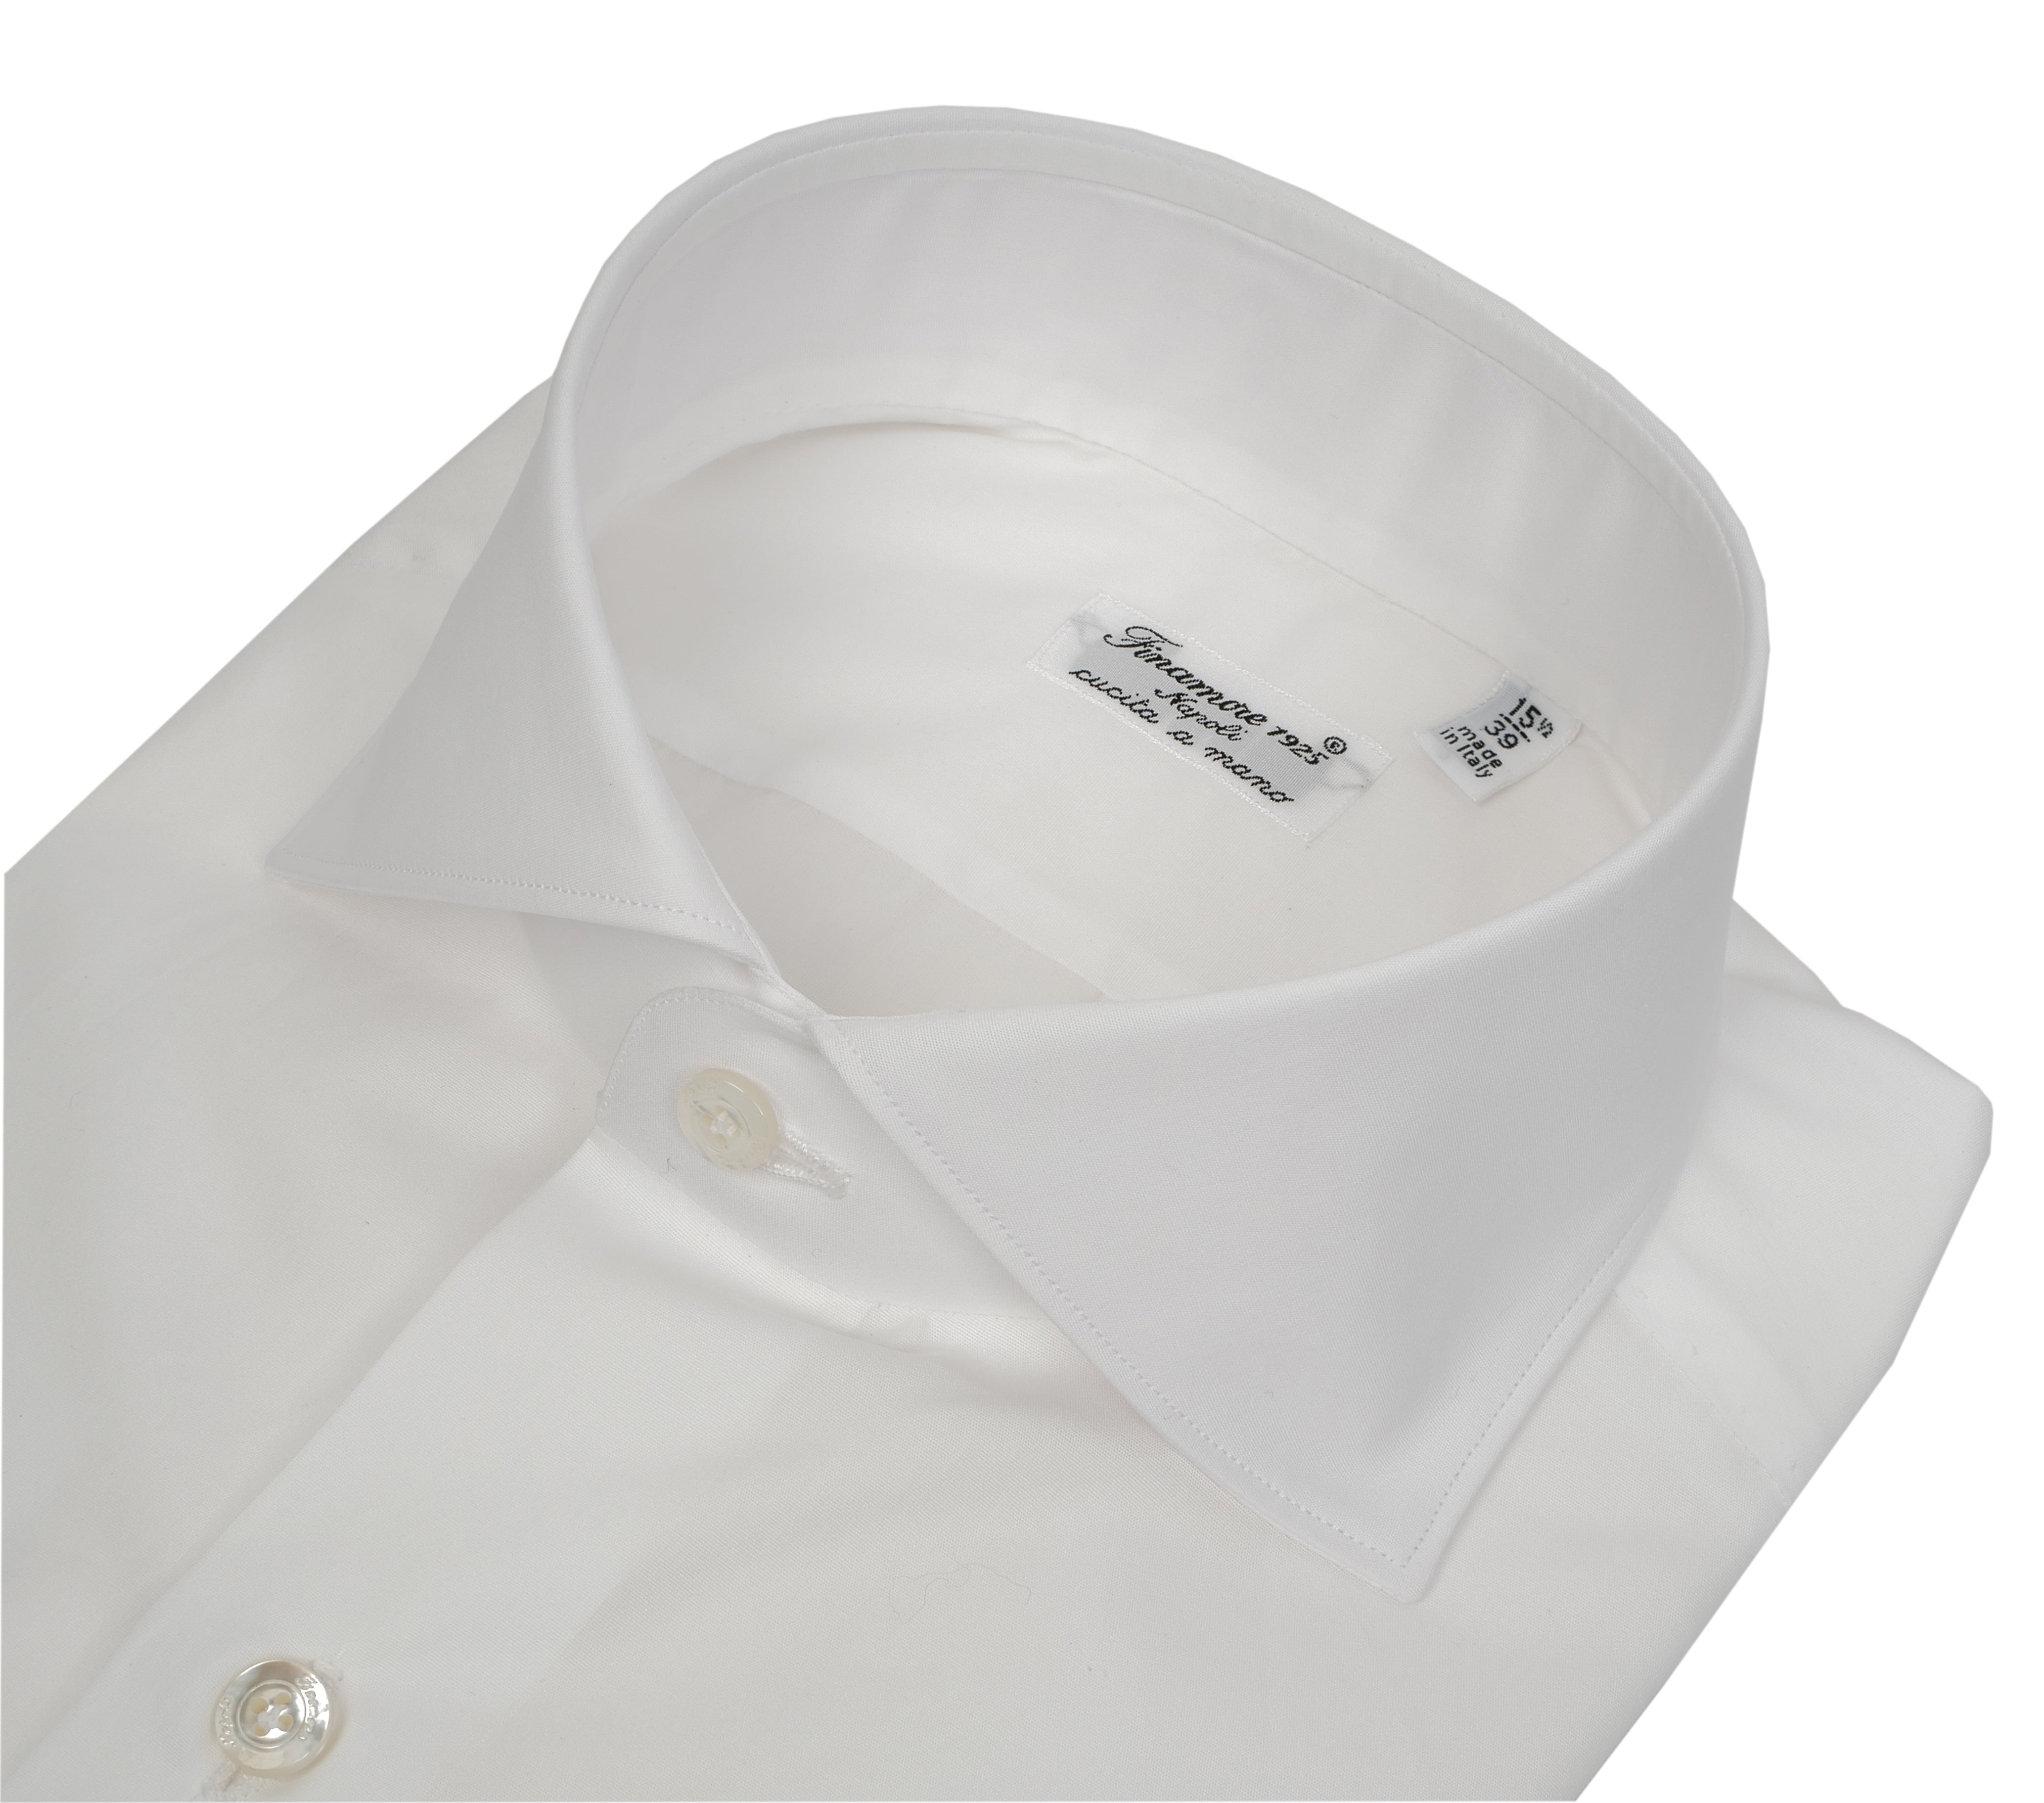 Tailored shirt in double twisted poplin cotton, Milan line